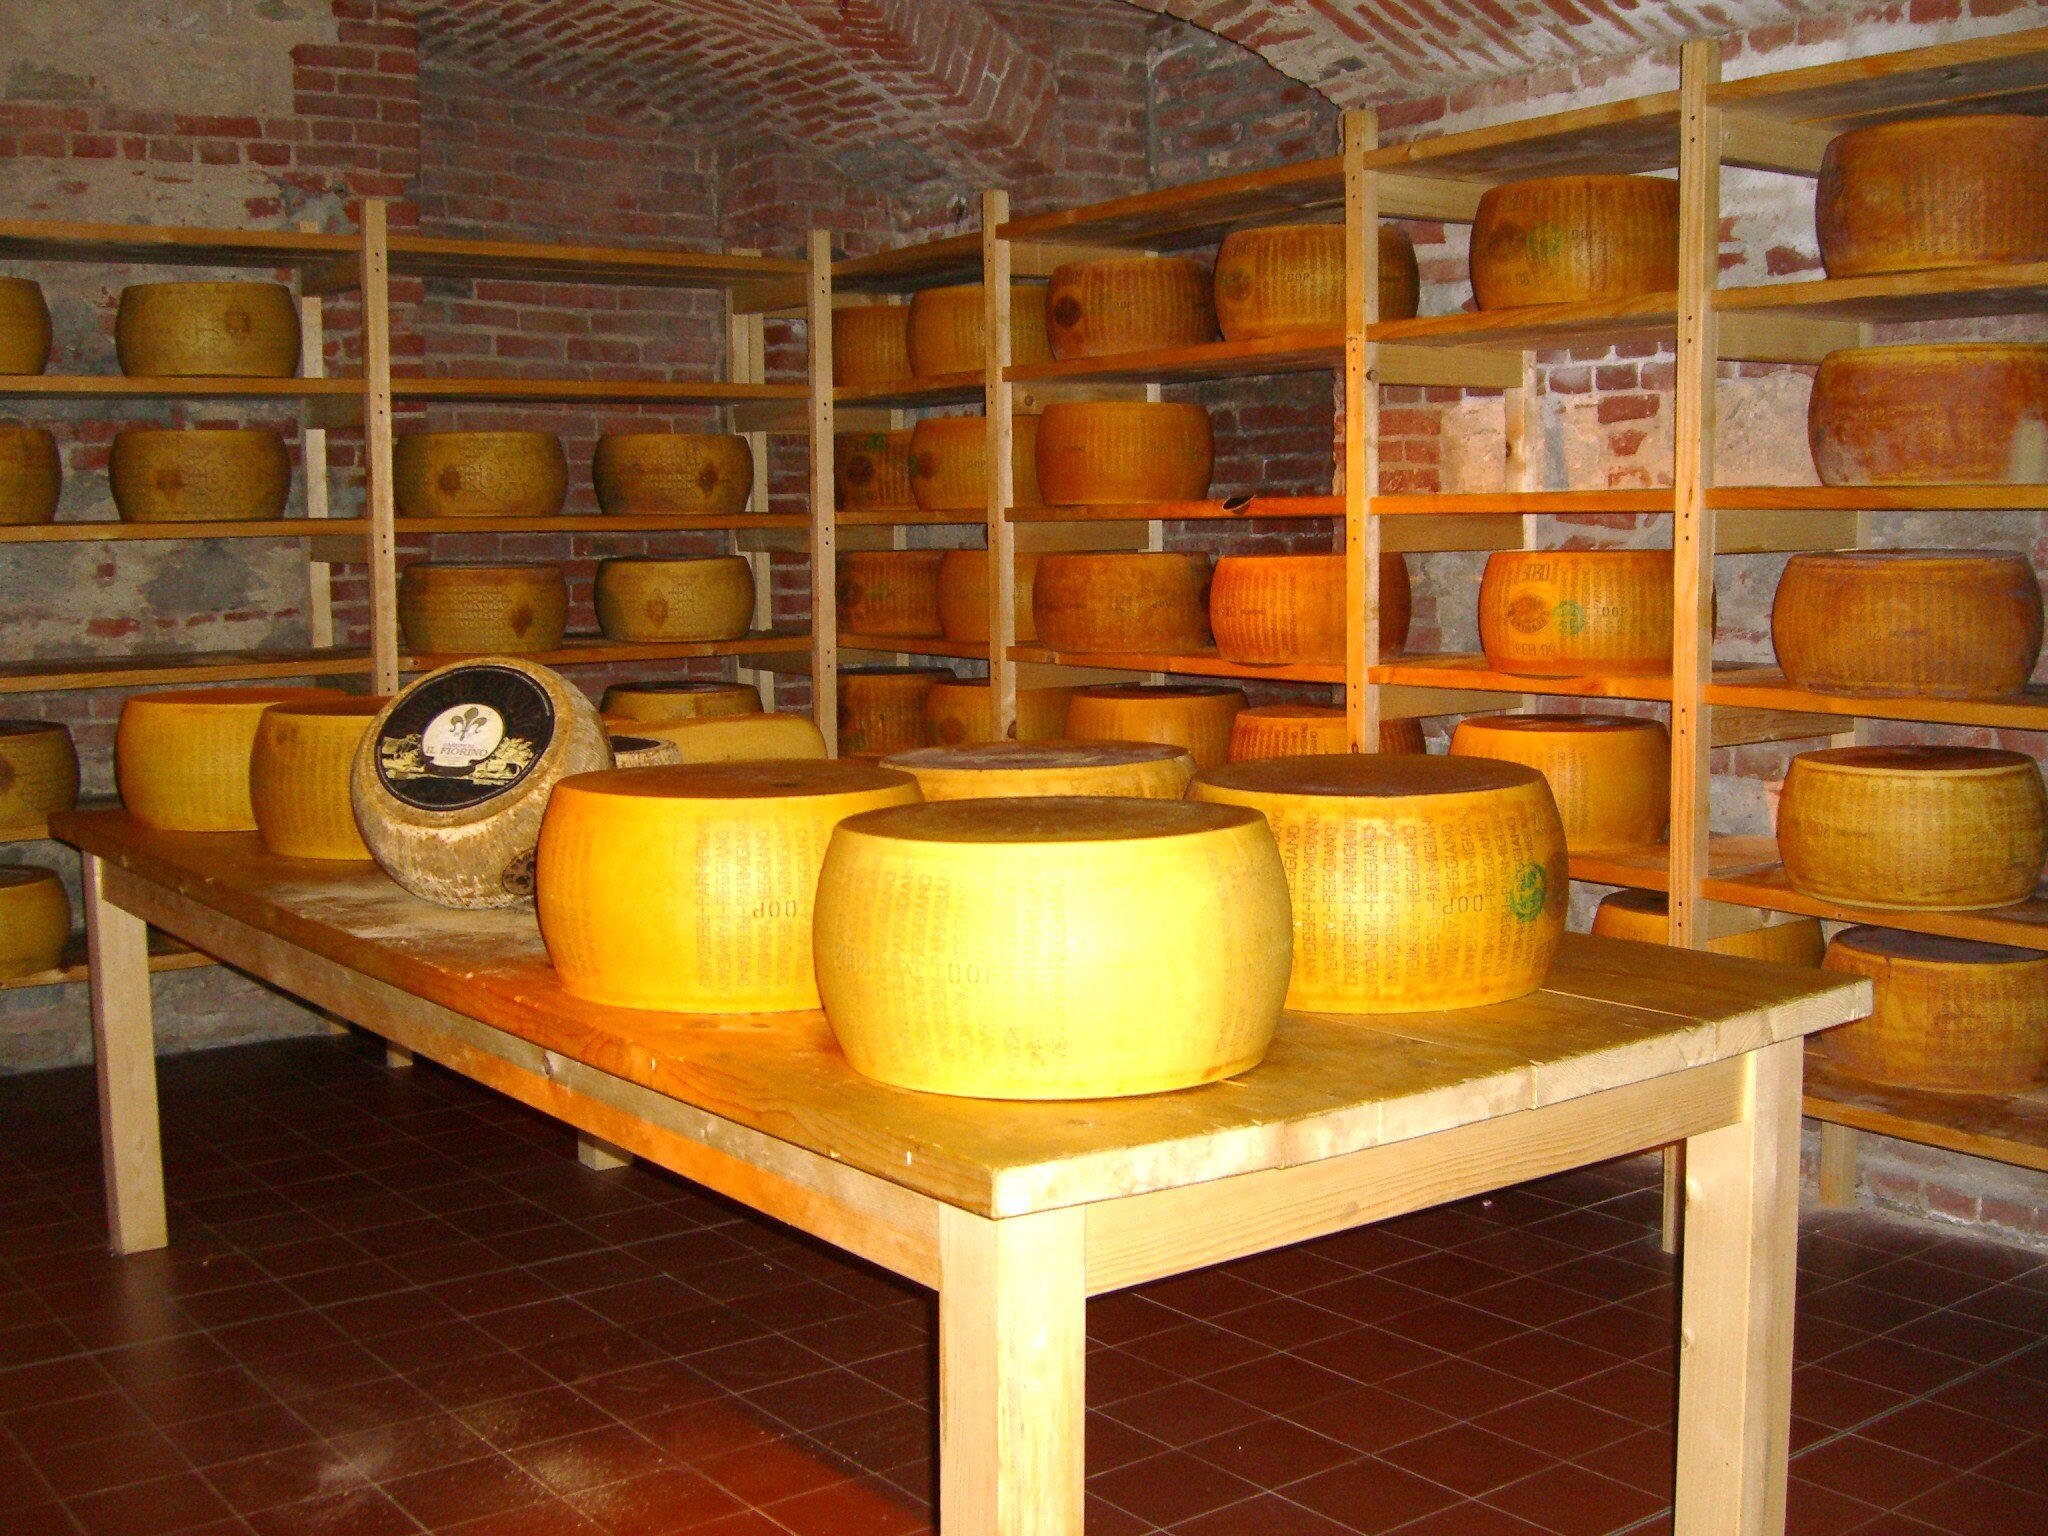 Wheels of Parmigiano Reggiano, one of the most famous food products from Italy.